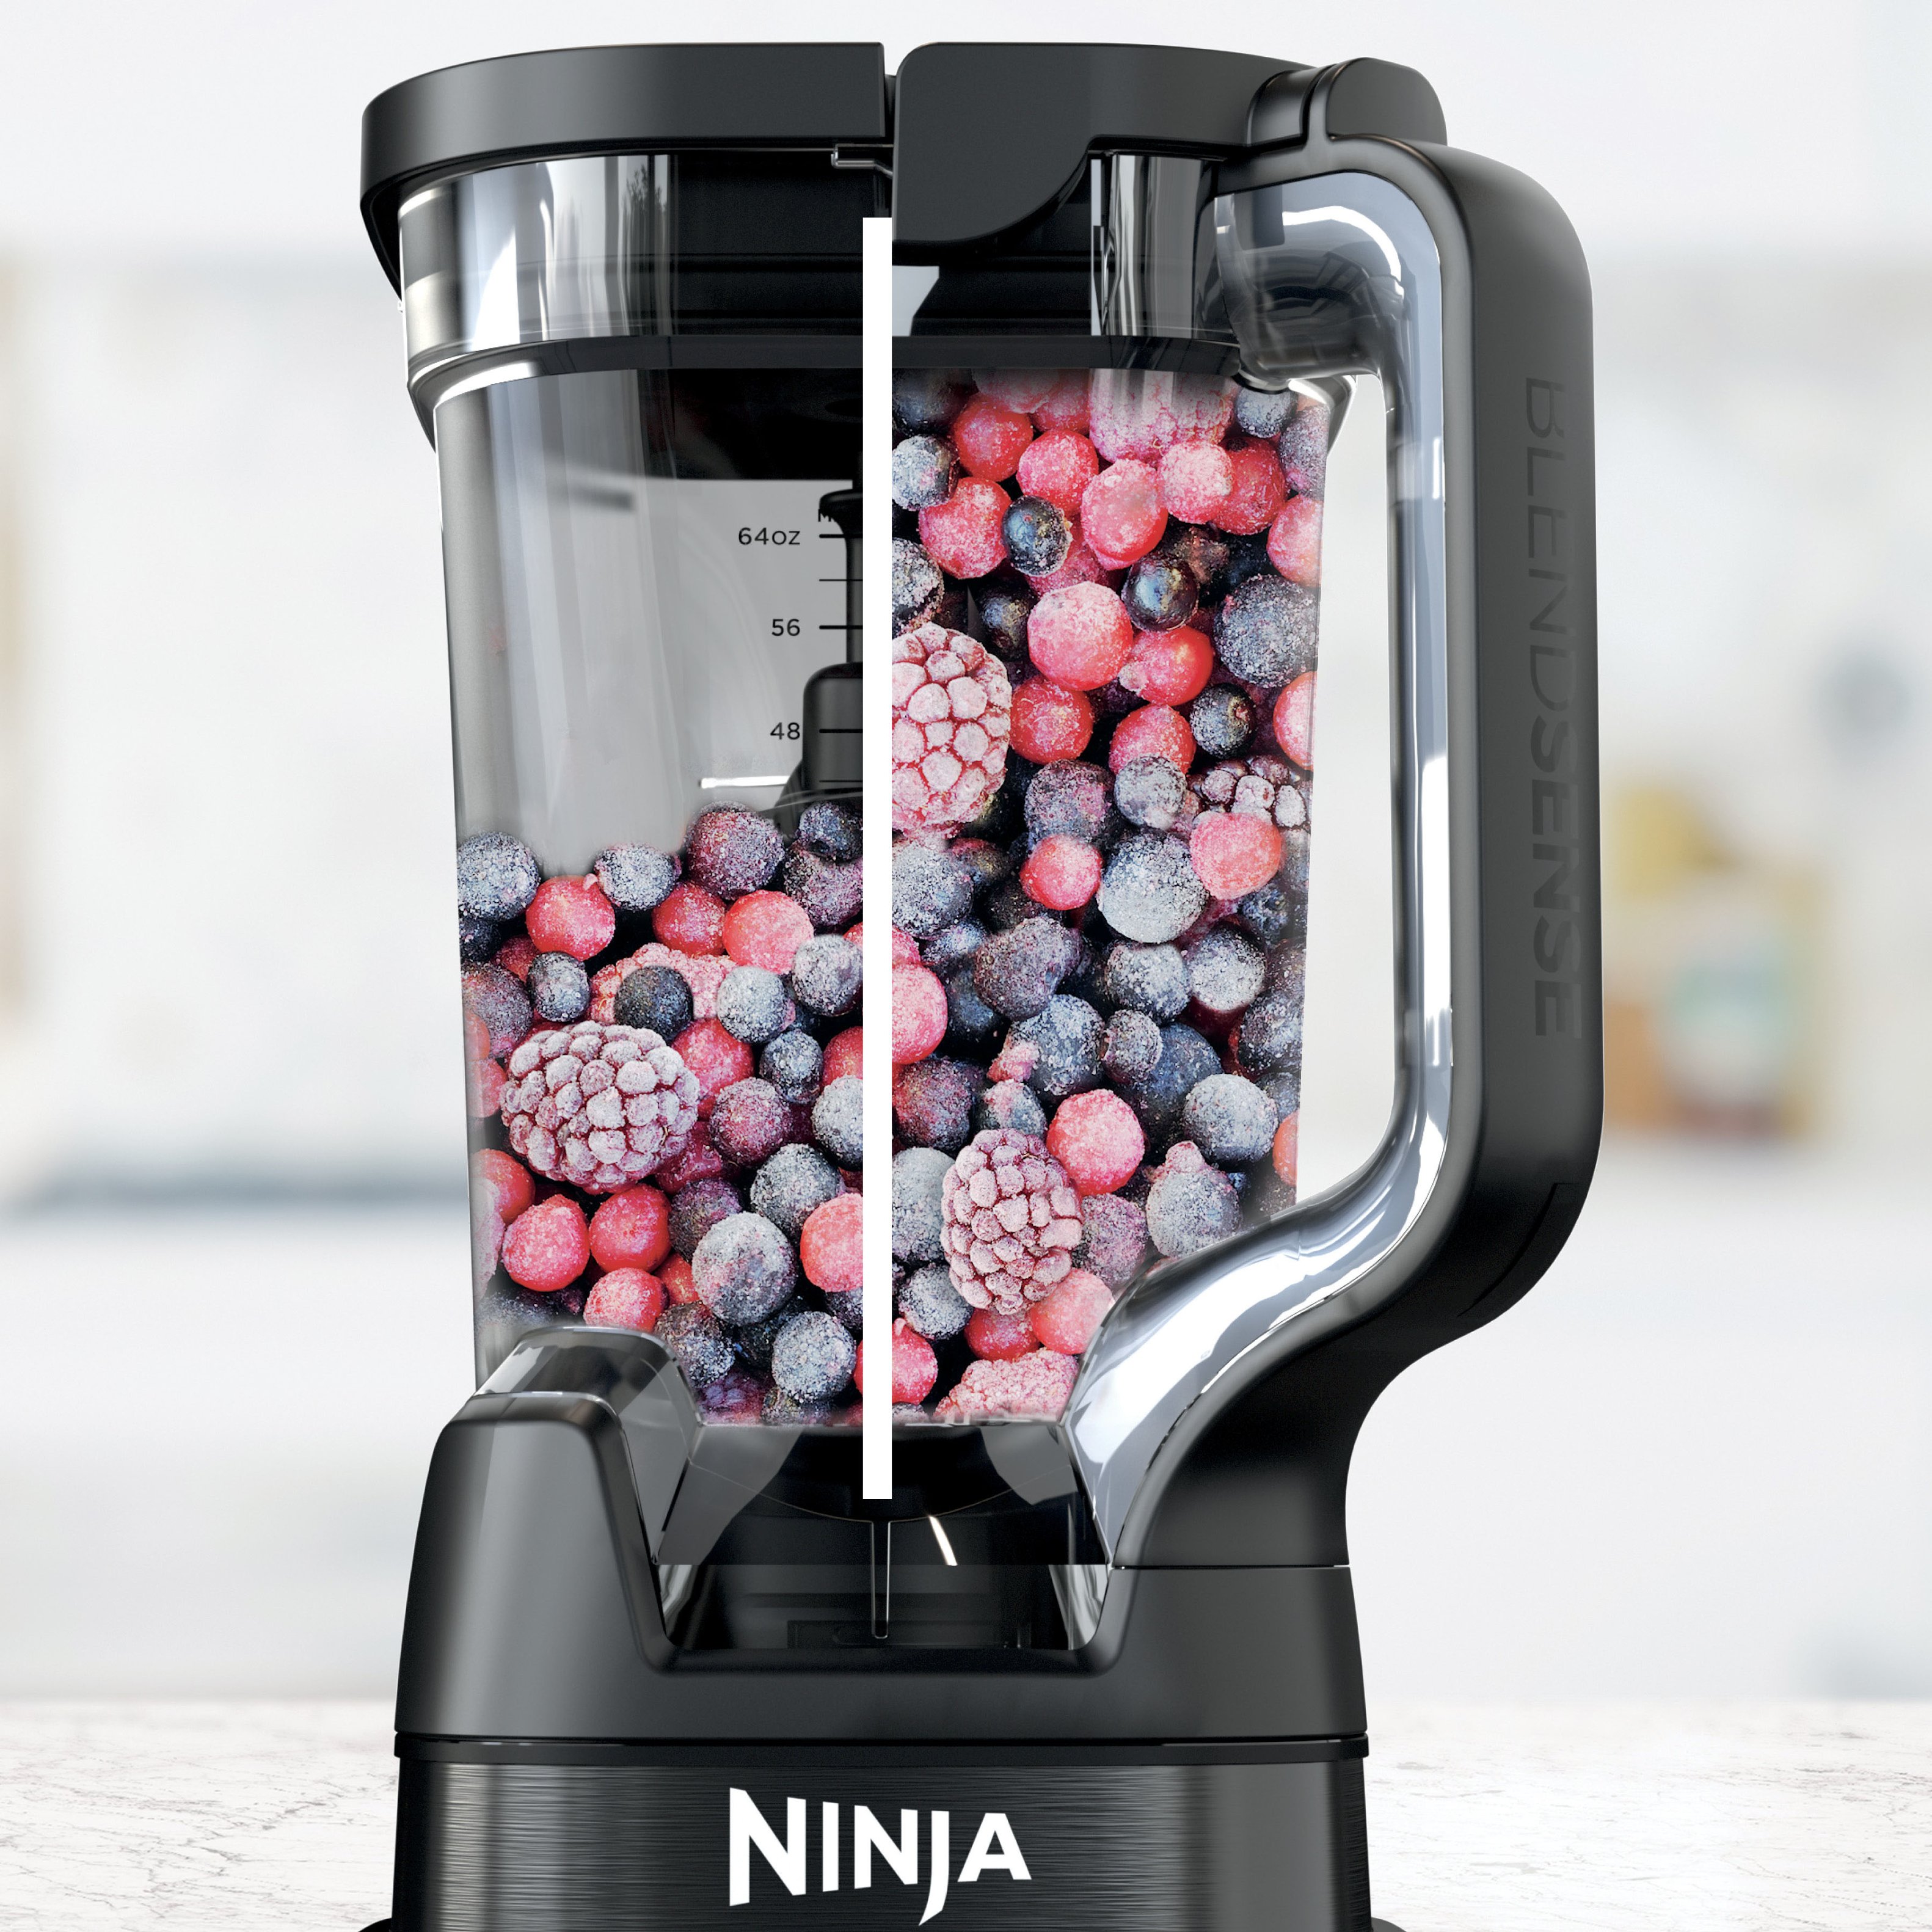 Enter to win a Ninja Chef Duo Blender from Best Buy